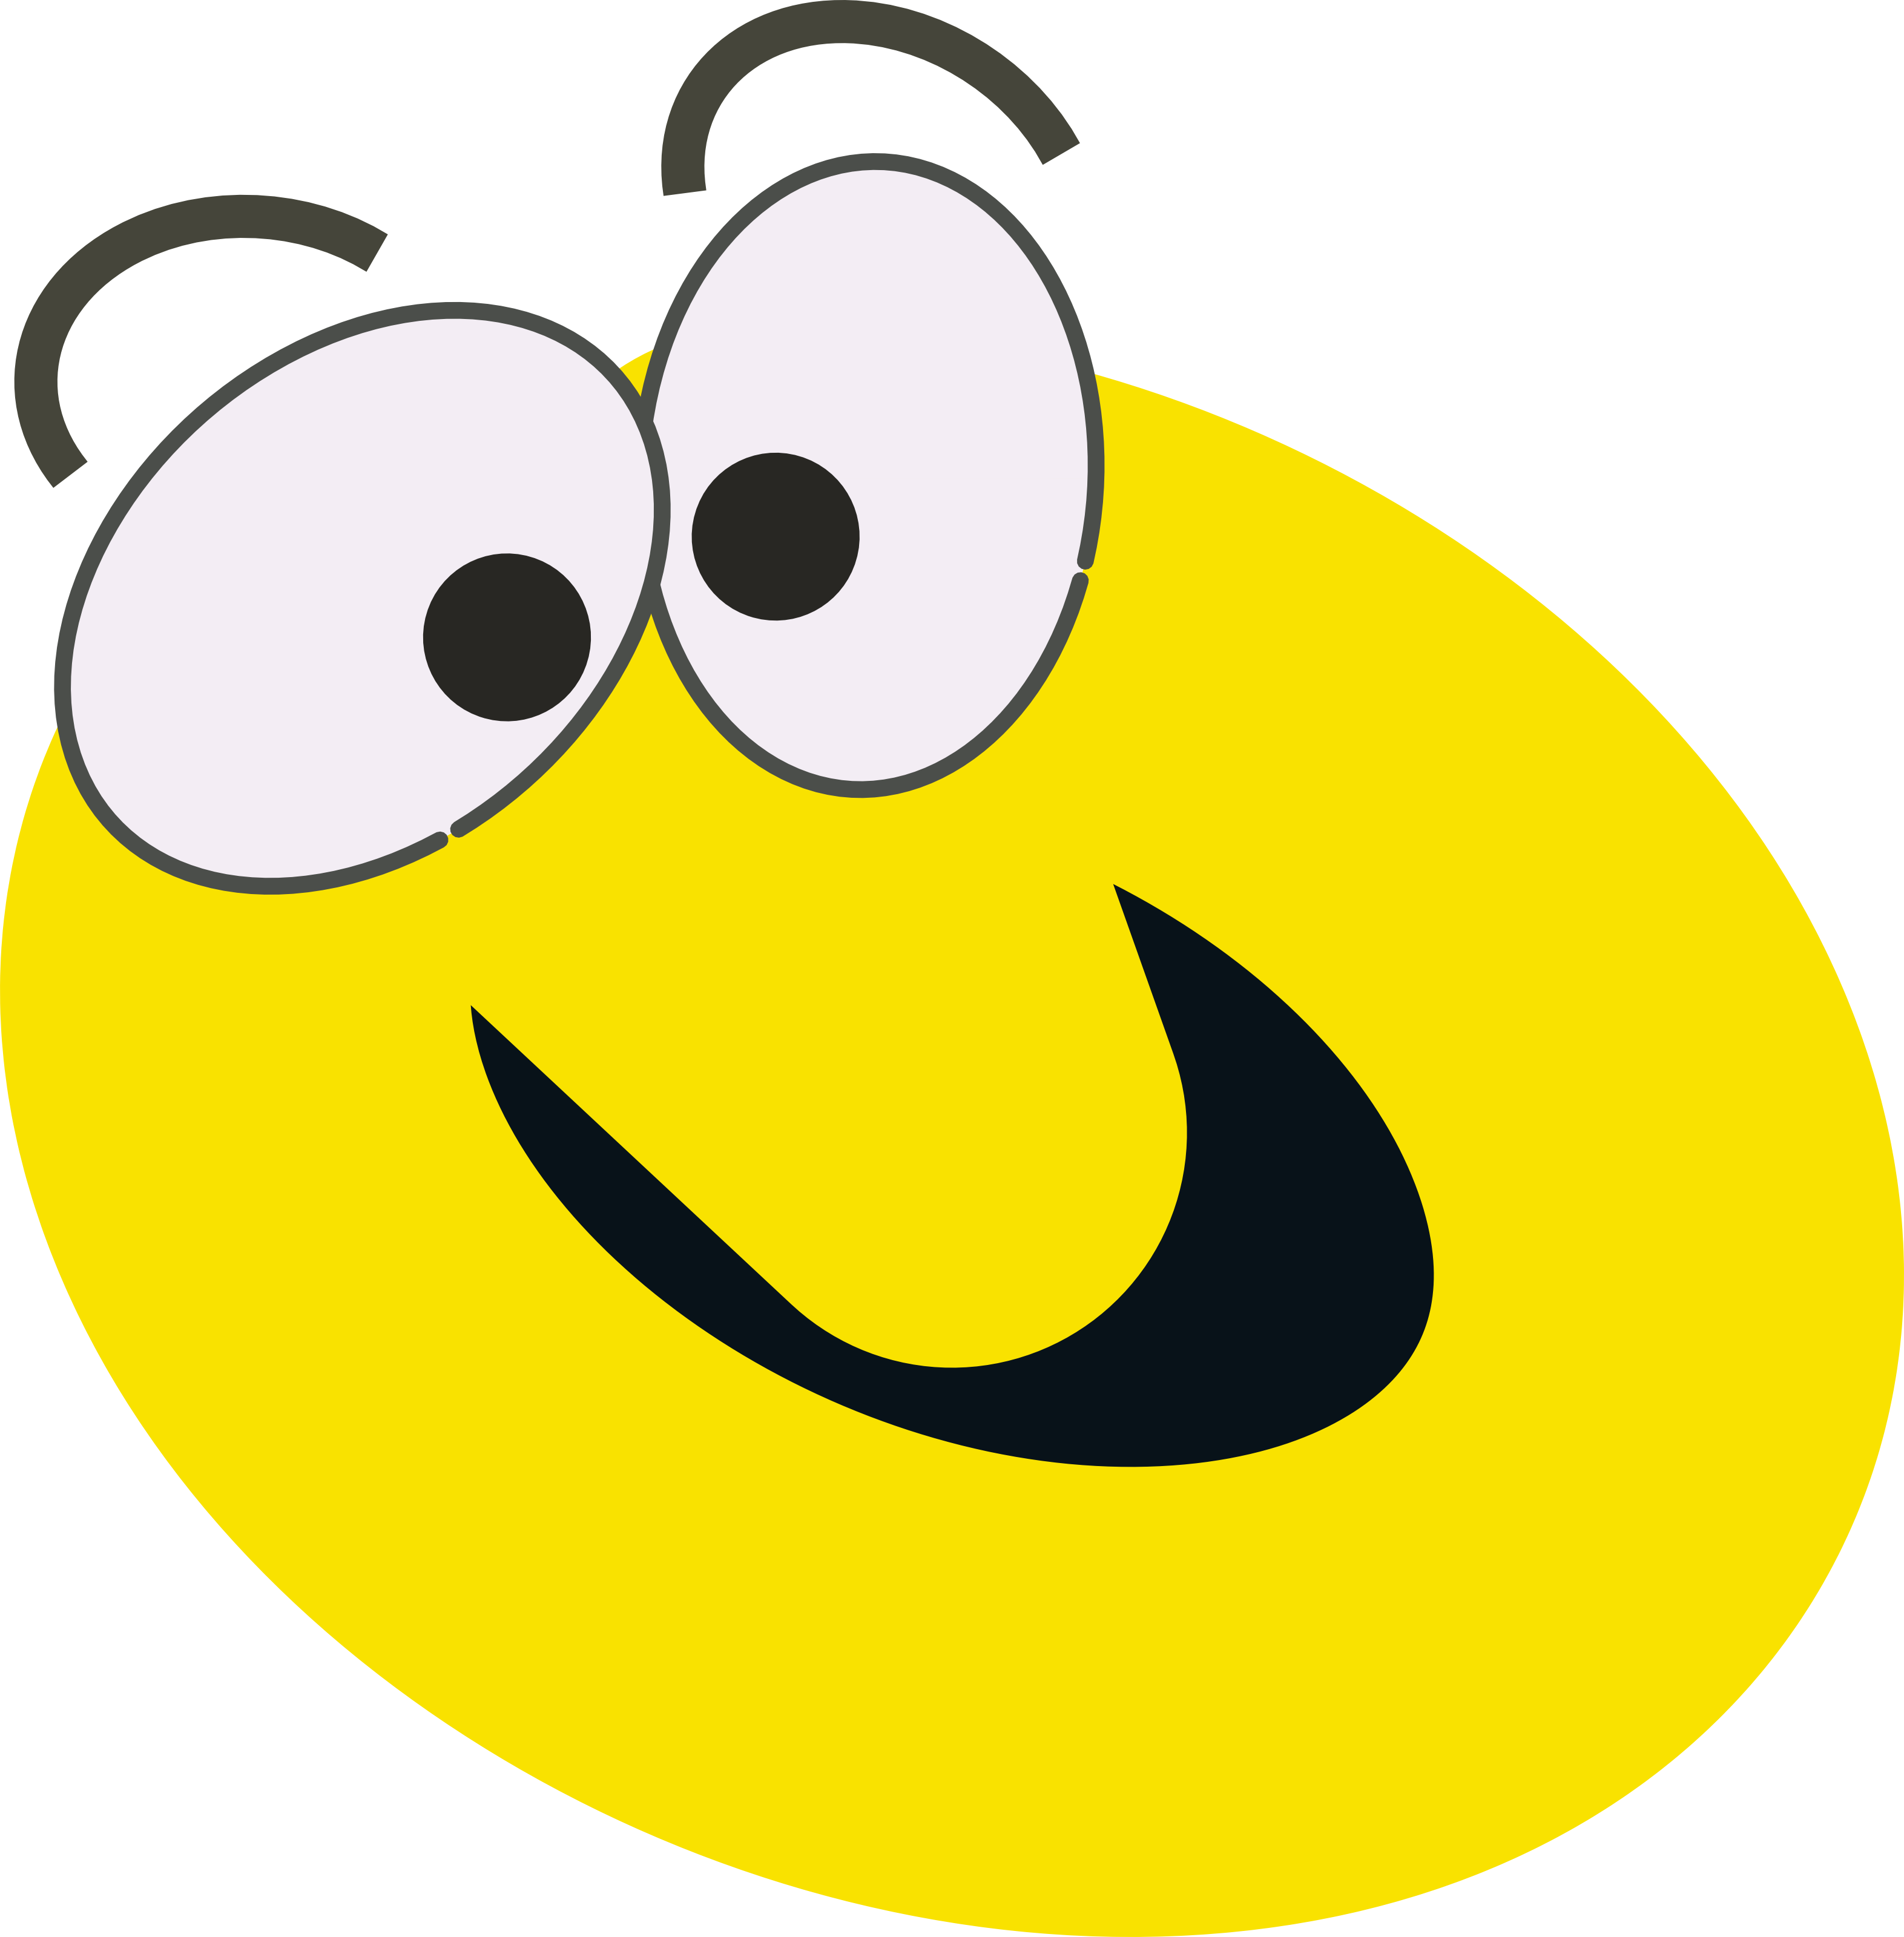 Smiley Face Clip Art Animated   Clipart Panda   Free Clipart Images